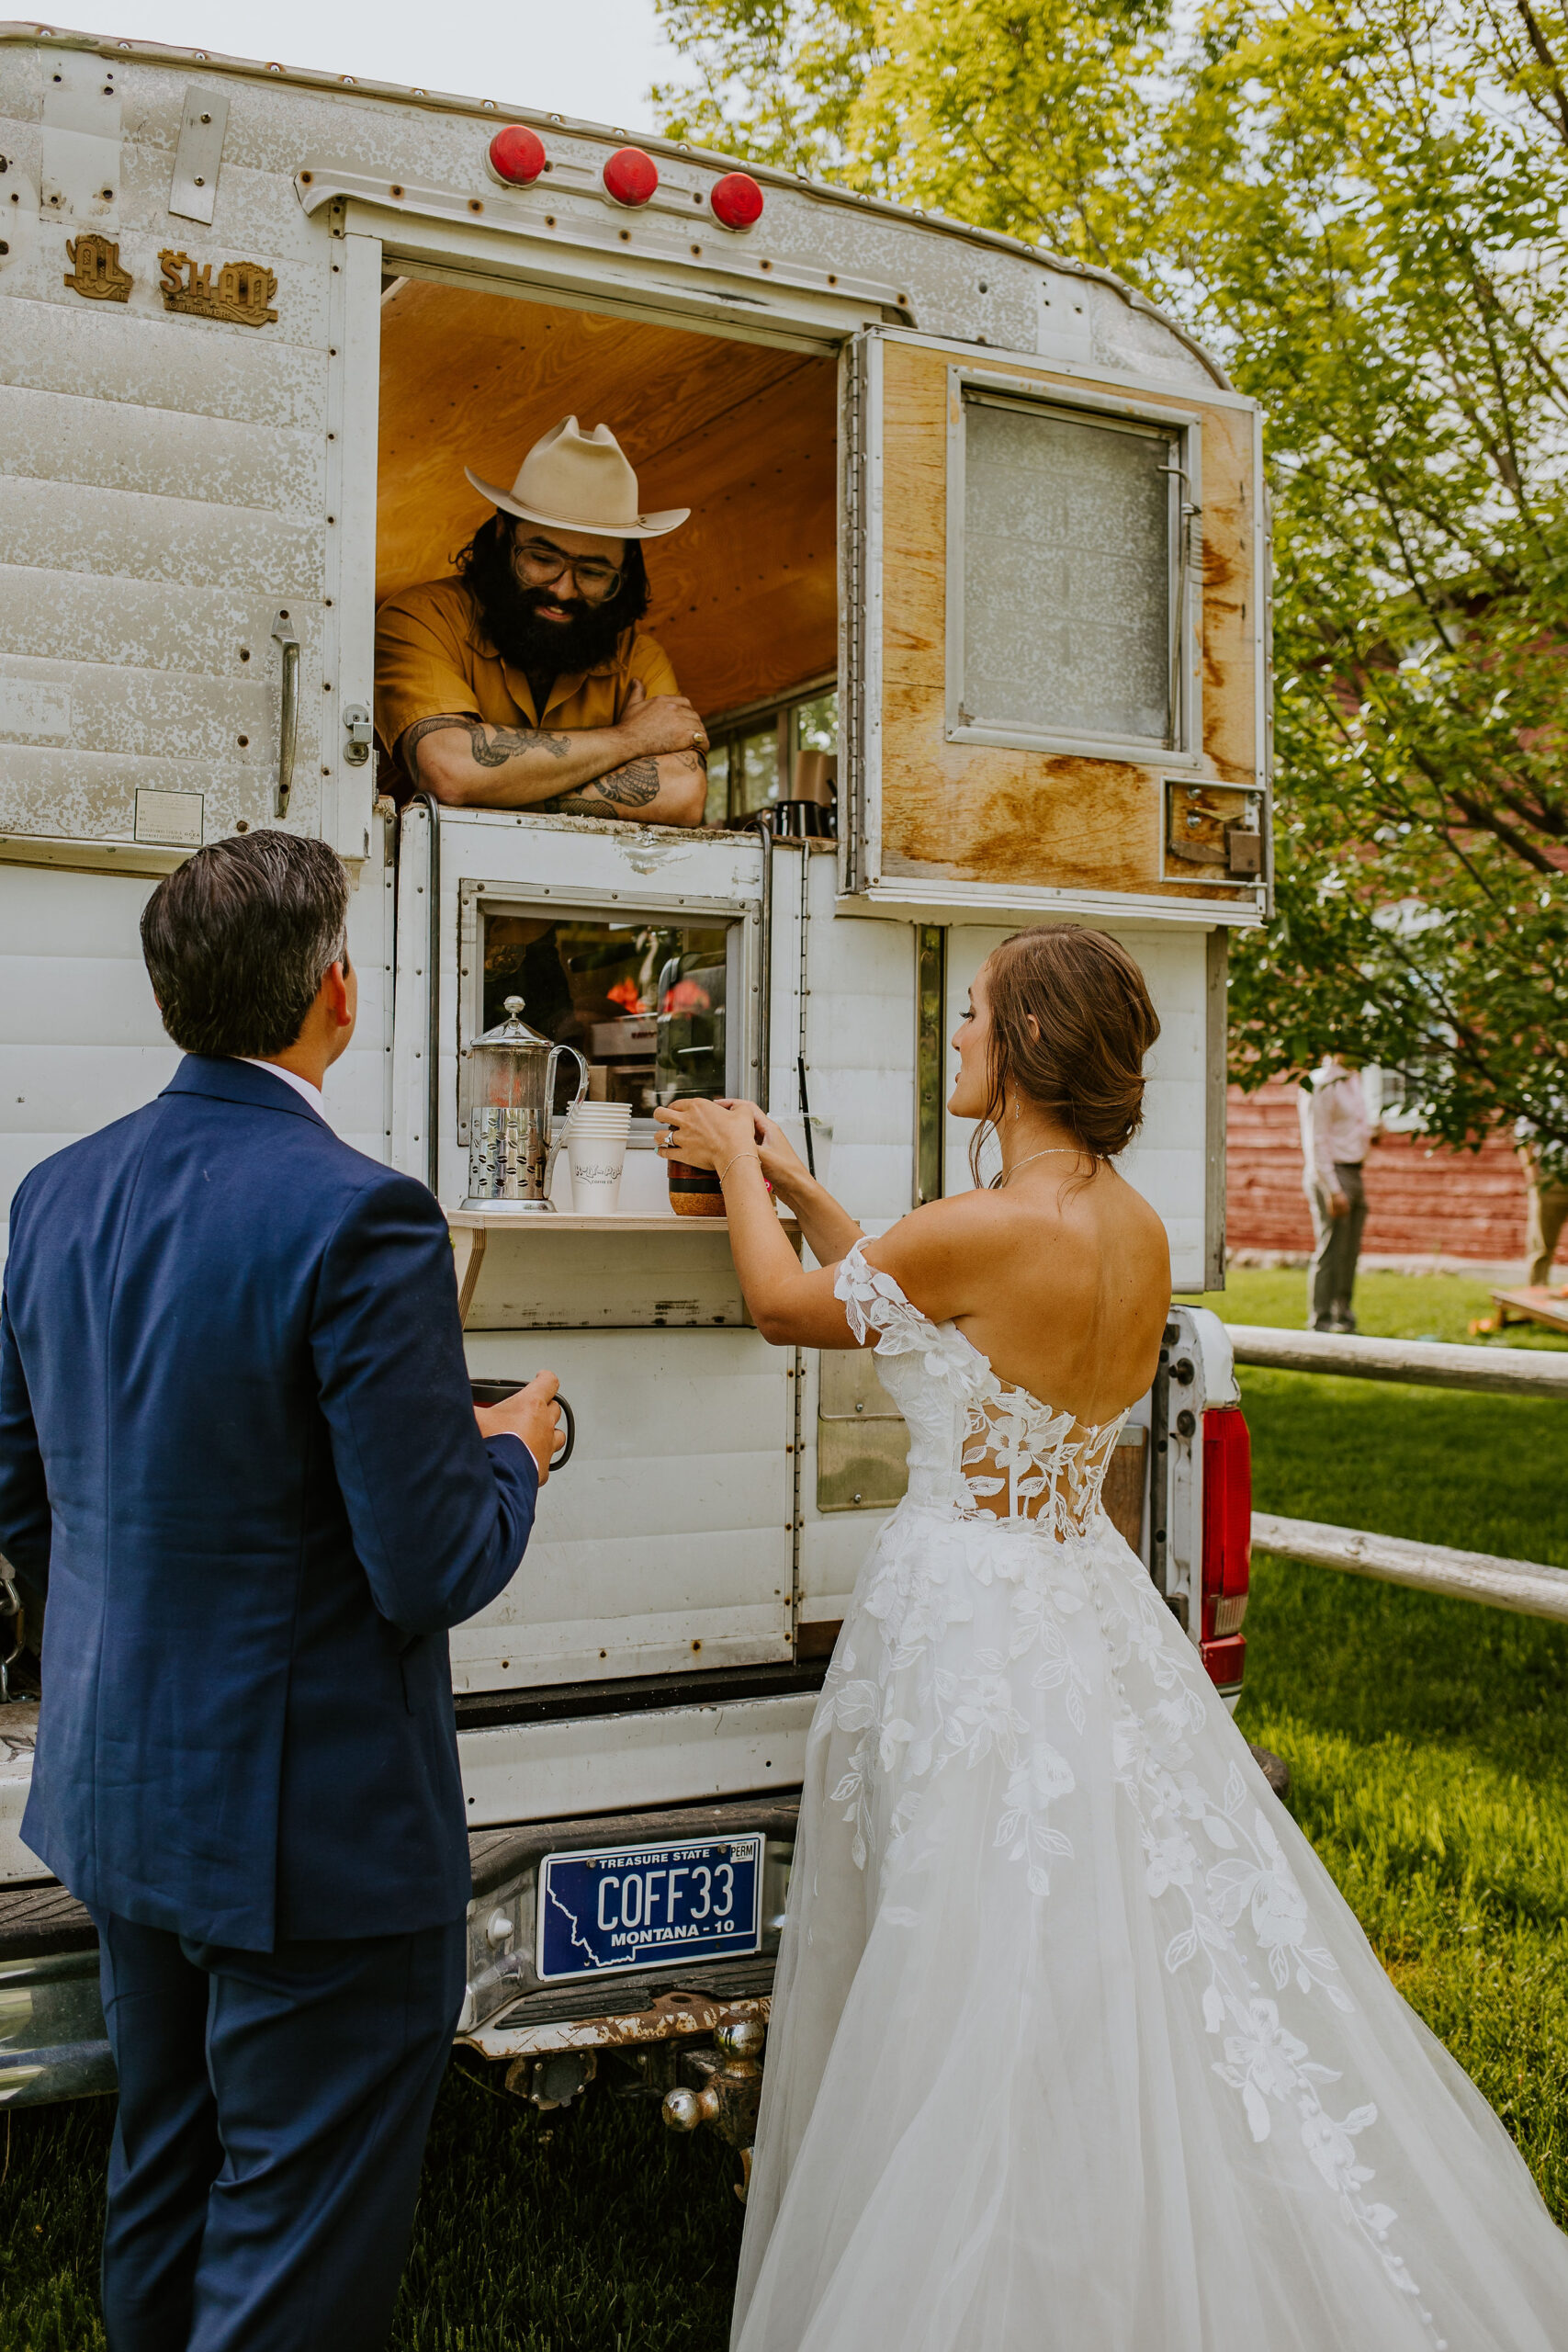 Bozeman Roly Poly Coffee Trailer for weddings